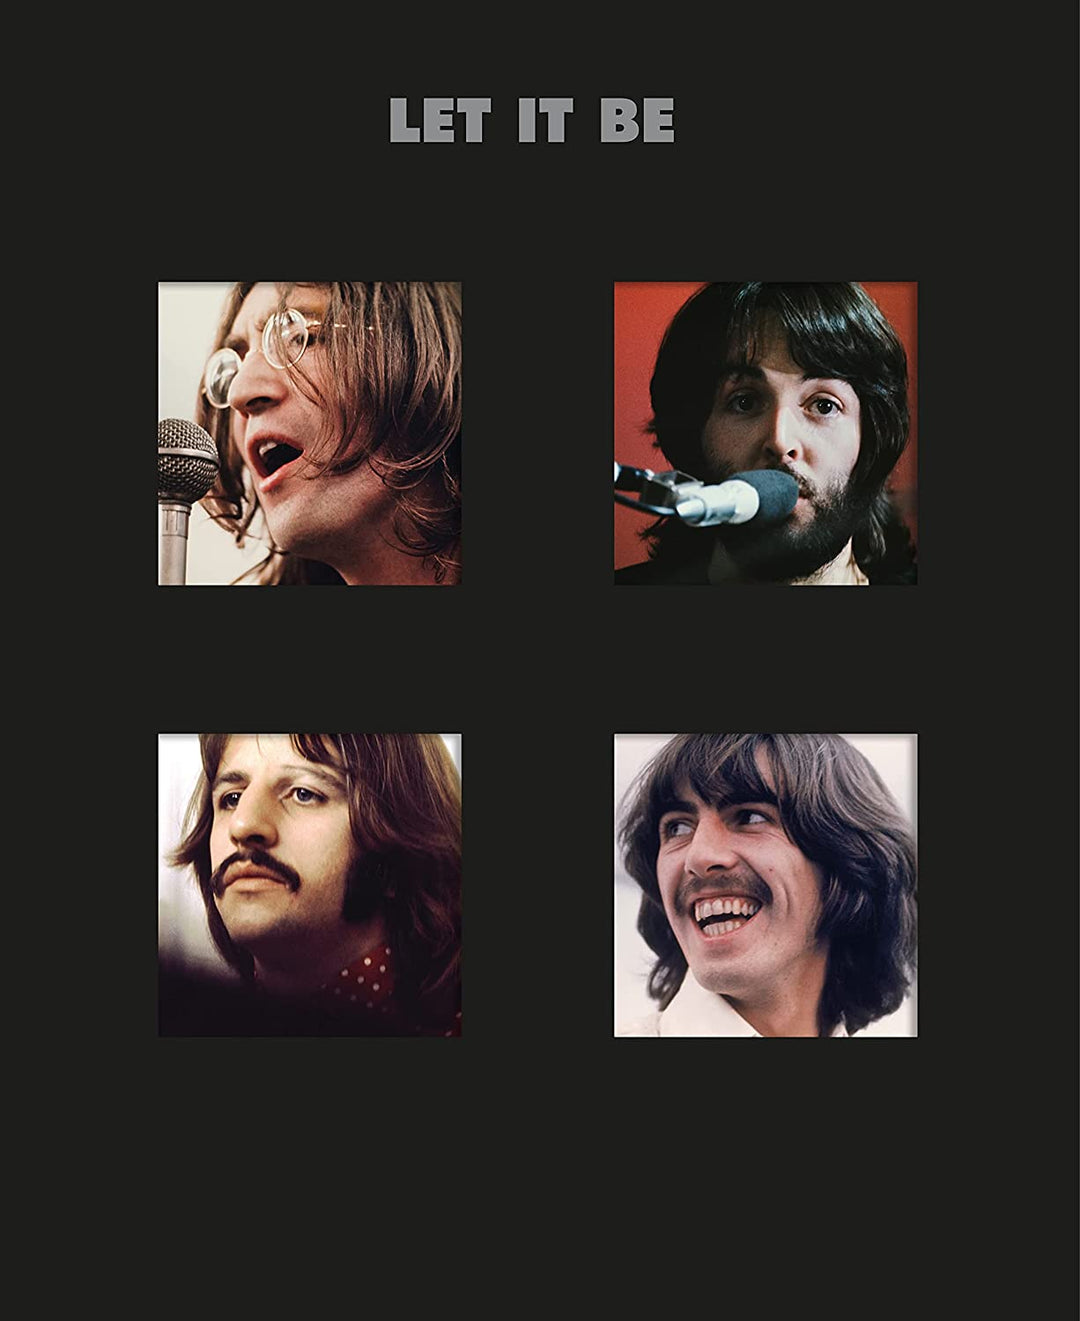 The Beatles - Let It Be (Super Deluxe) [Audio CD]